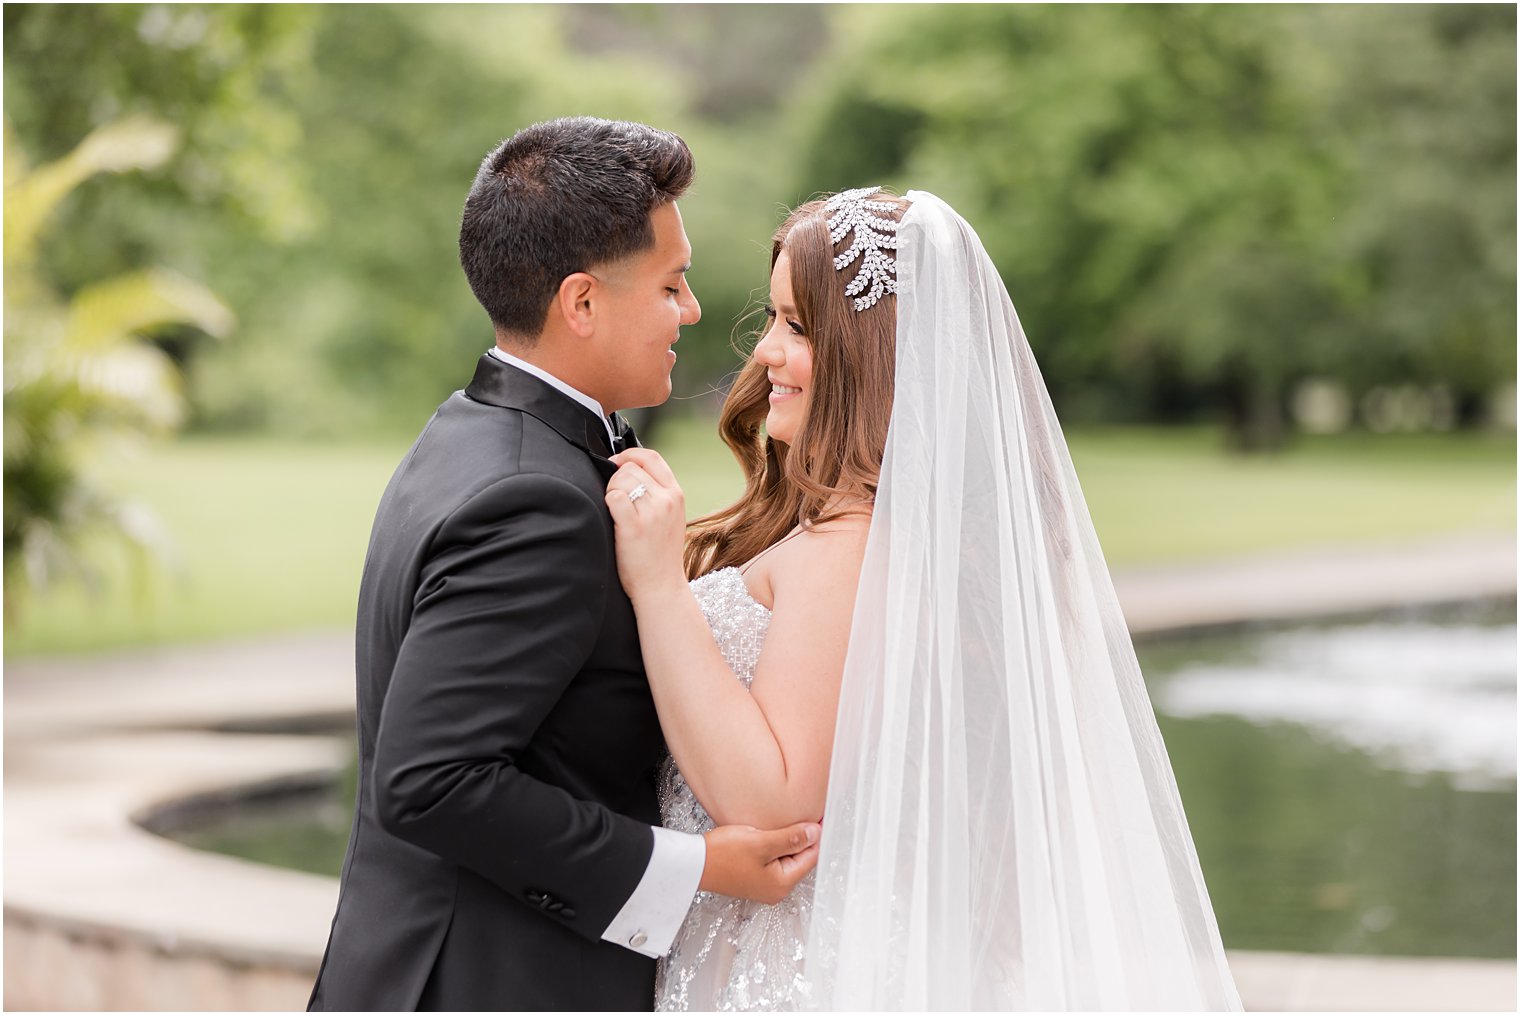 newlyweds dance smiling together by fountain at Fairmount Park Horticulture Center